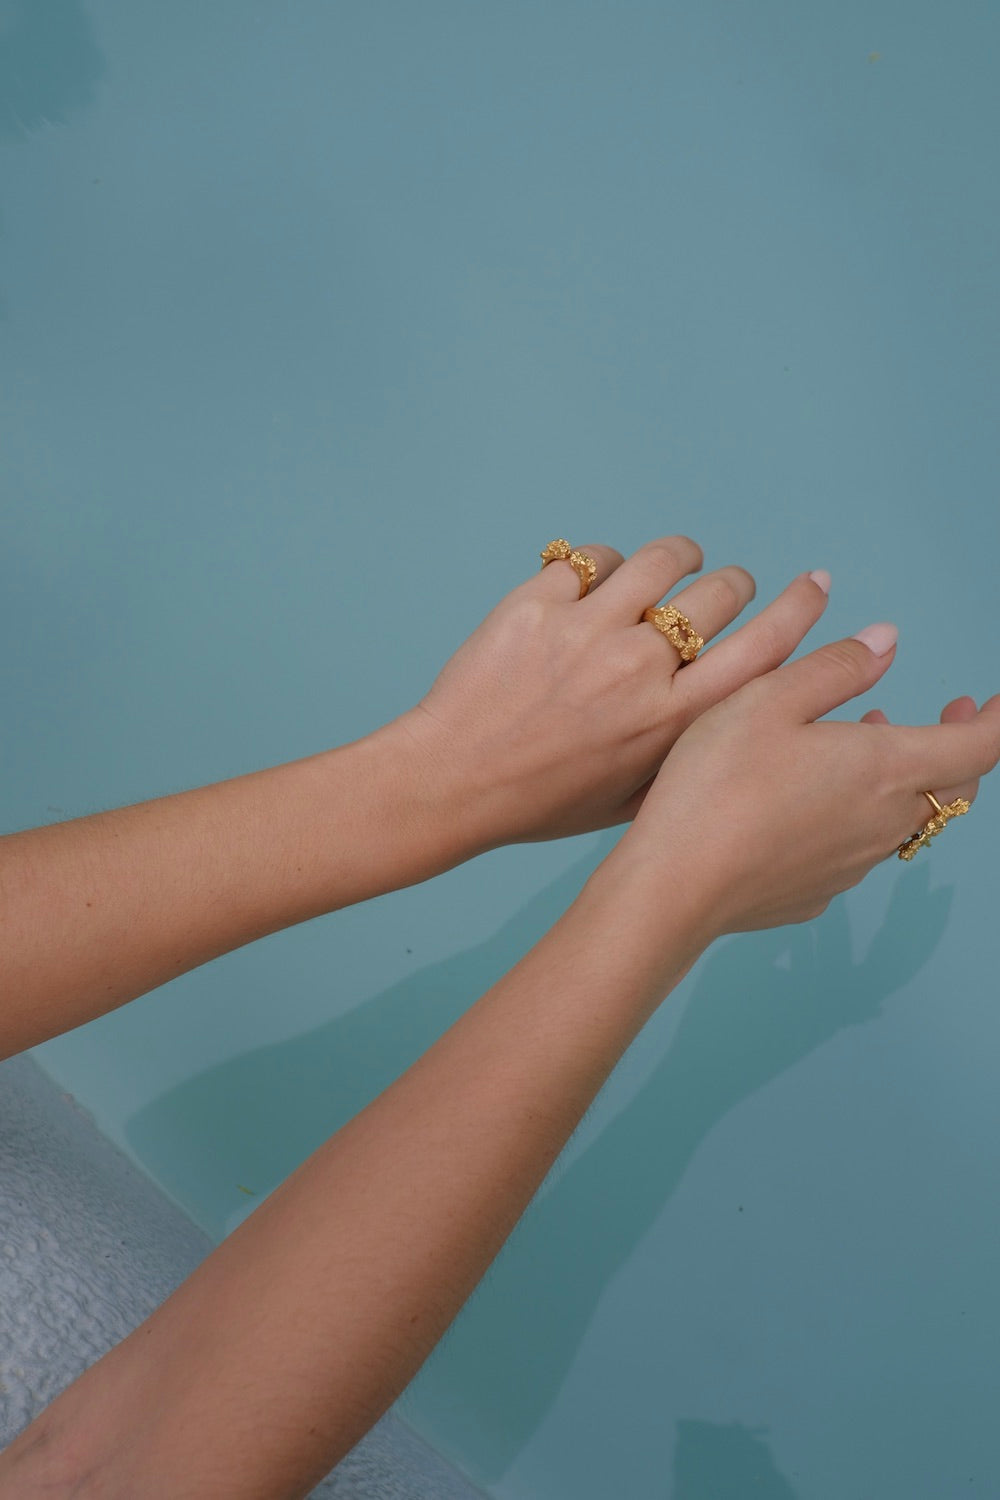 A woman's handcrafted hands in a pool with gold rings on them featuring the exquisite Glade ring GP from her dazzling Cremilde Bispo Jewellery collection.